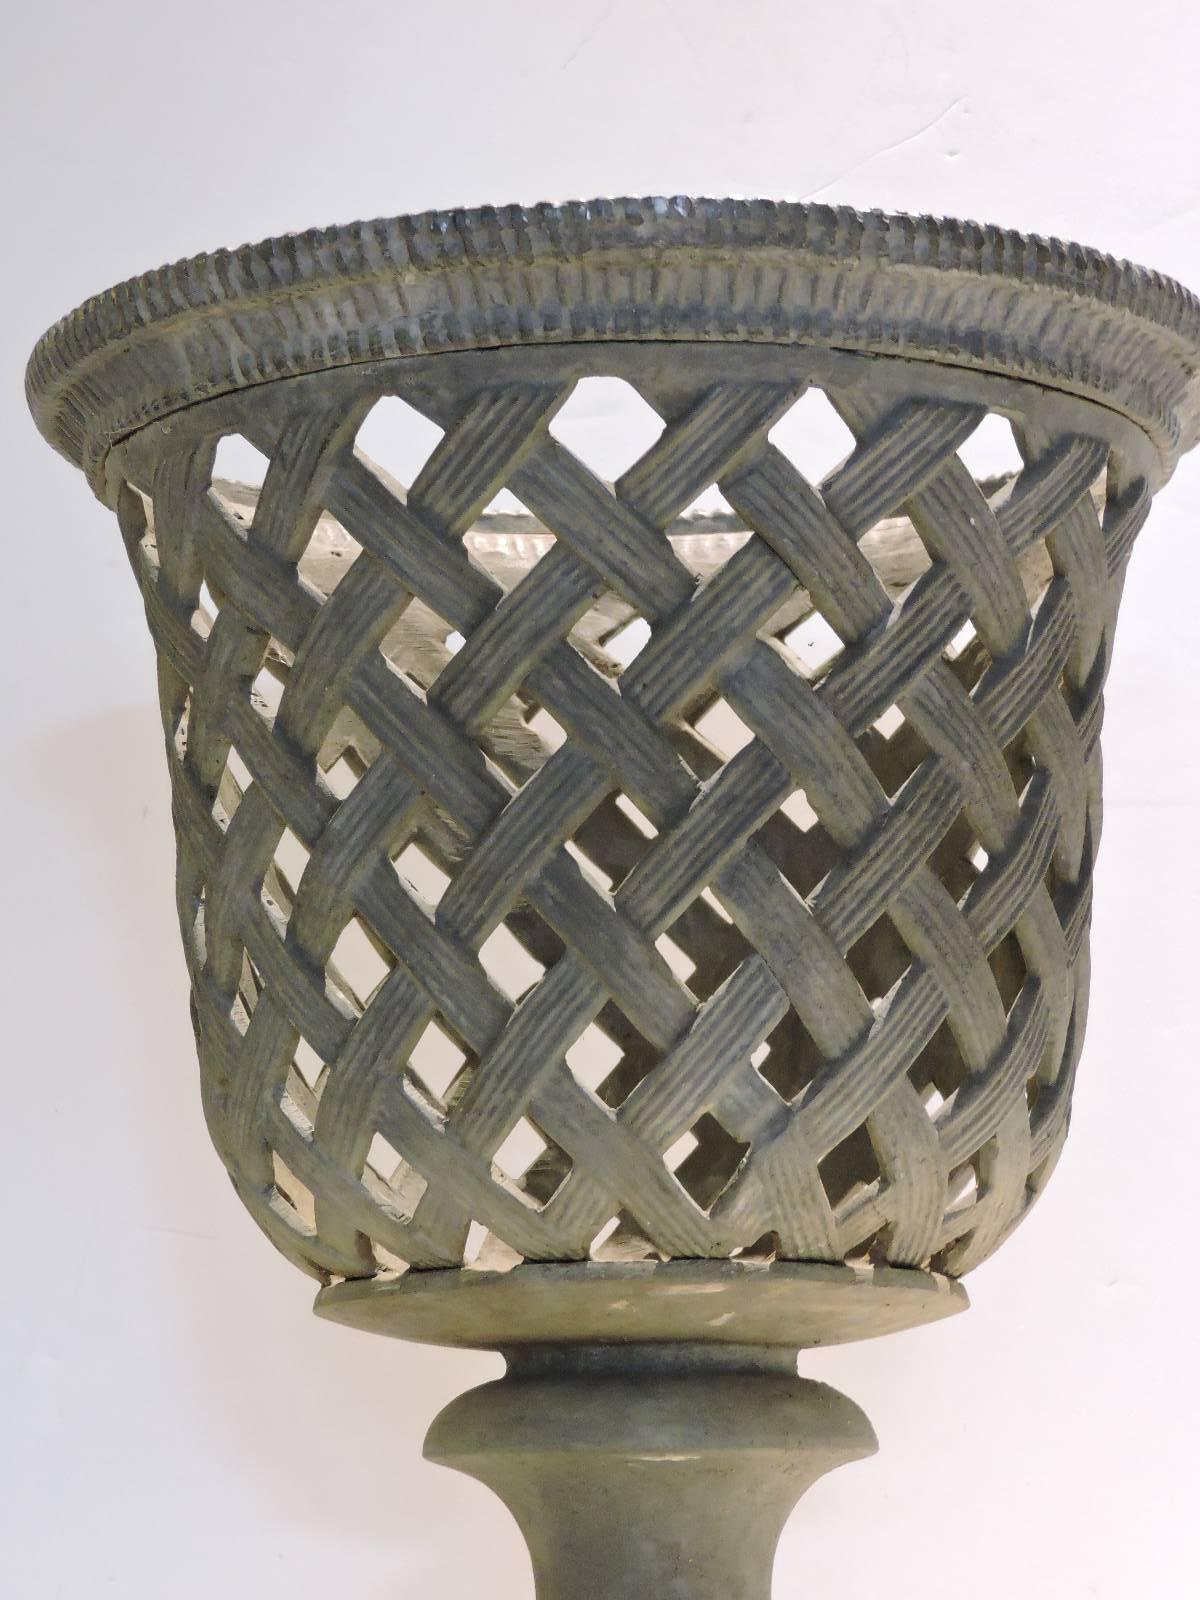 An exceptional quality and very heavy solid lead Campagna form finely detailed basket weave garden urn planter with nicely aged color to metal ware.